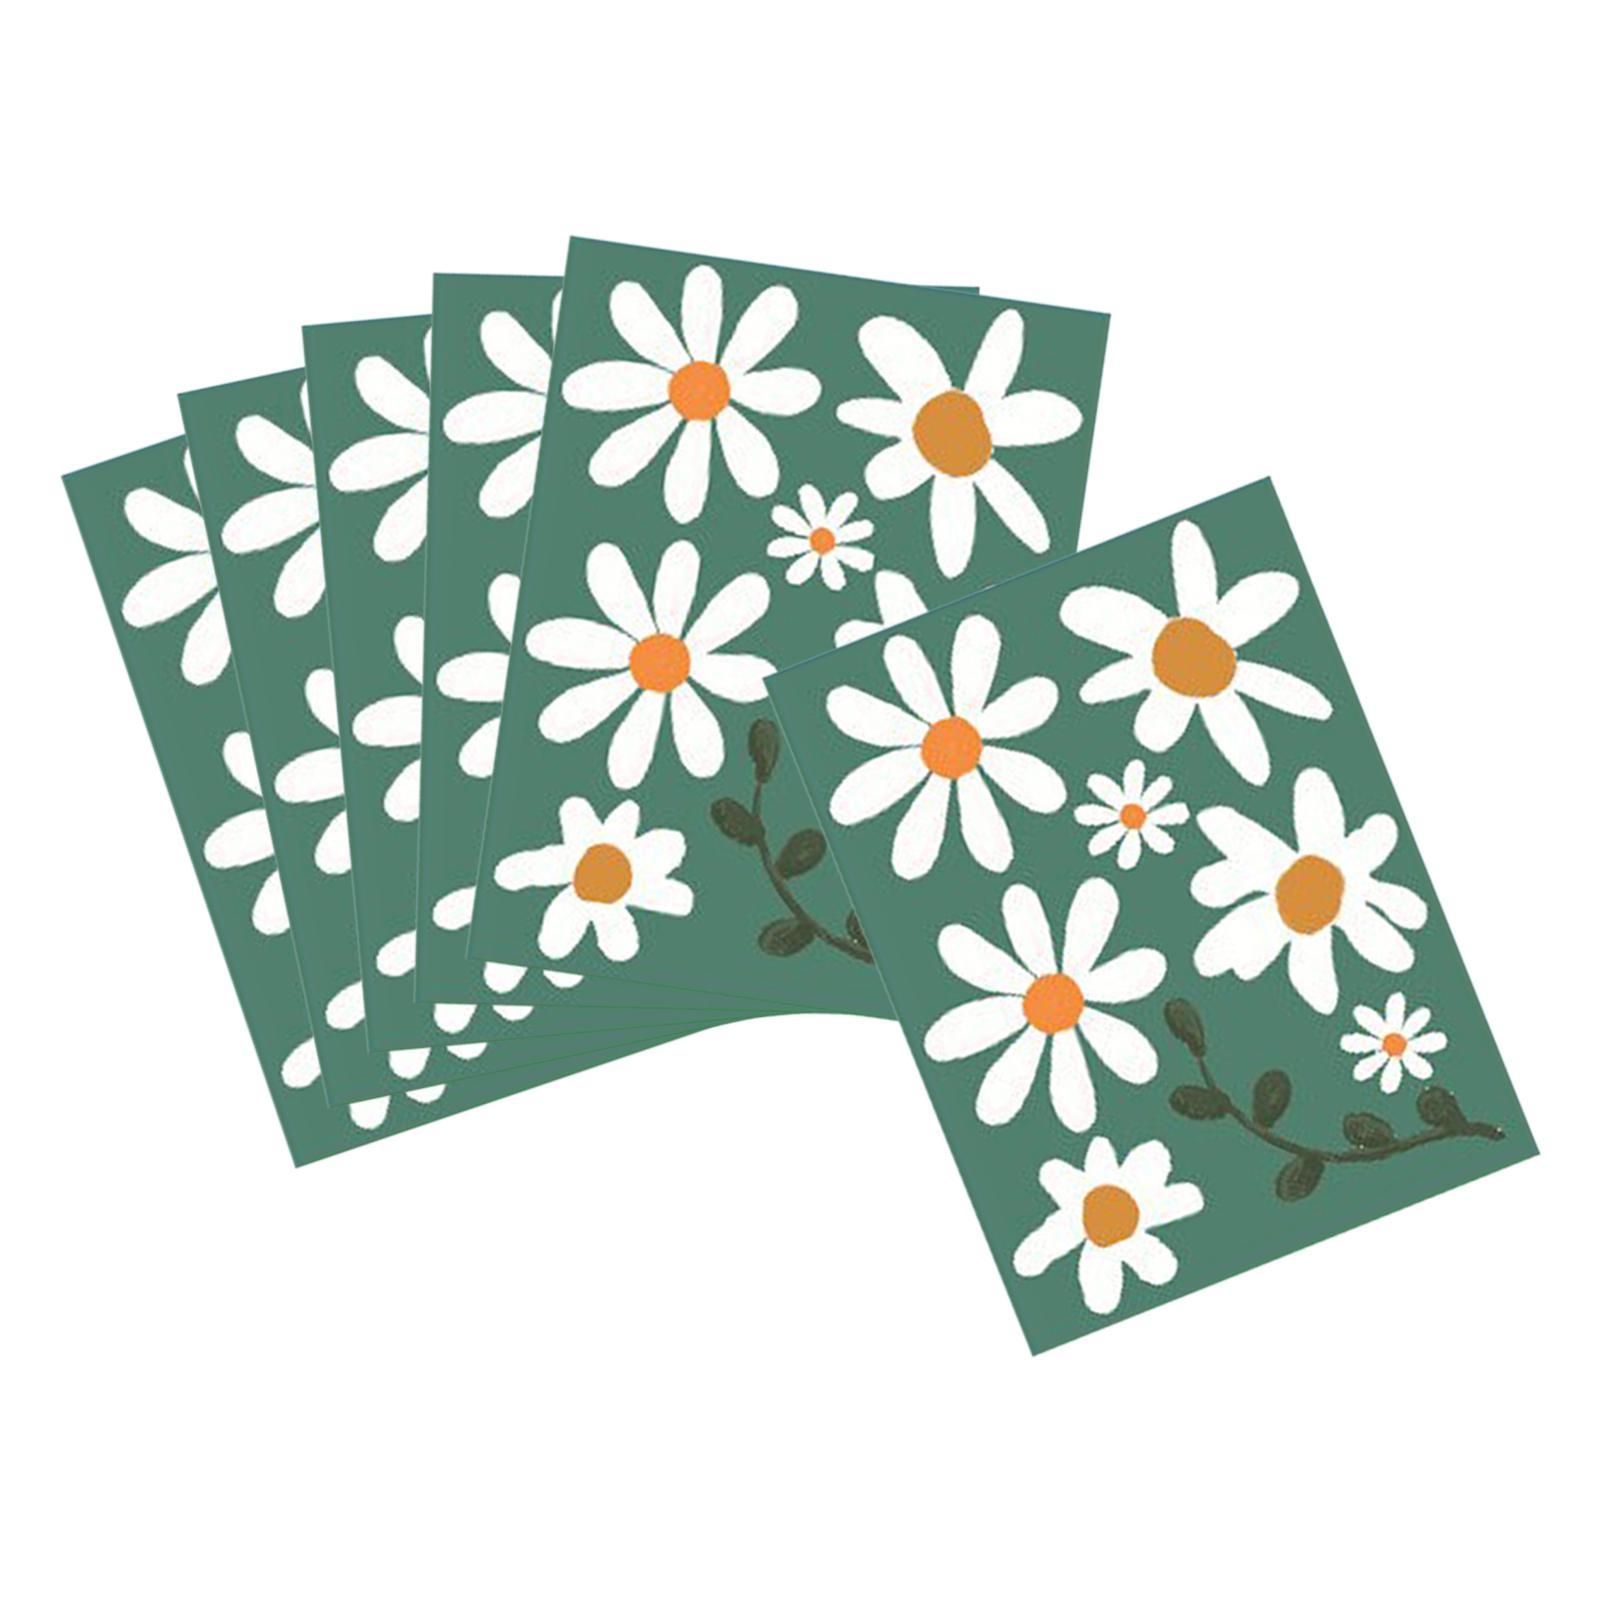 6x Daisy Flowers Wall Decals Creative  Stickers for Home Decor